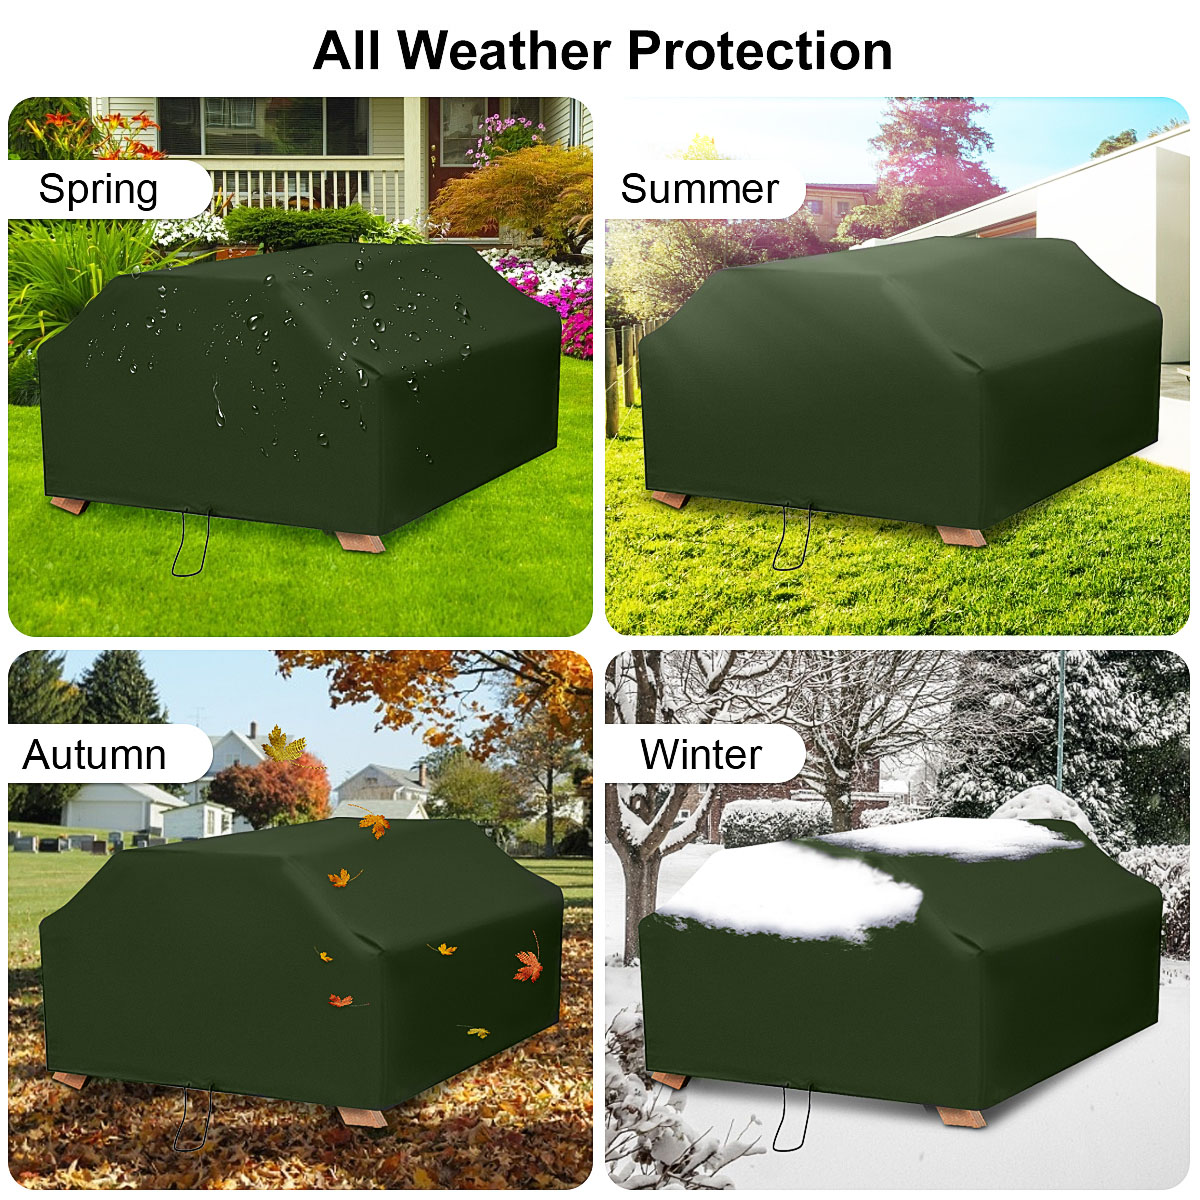 68-Seater-Waterproof-Table-Cover-Outdoor-Square-Tablecloth-Tear-Resistant-Picnic-Table-1750641-6